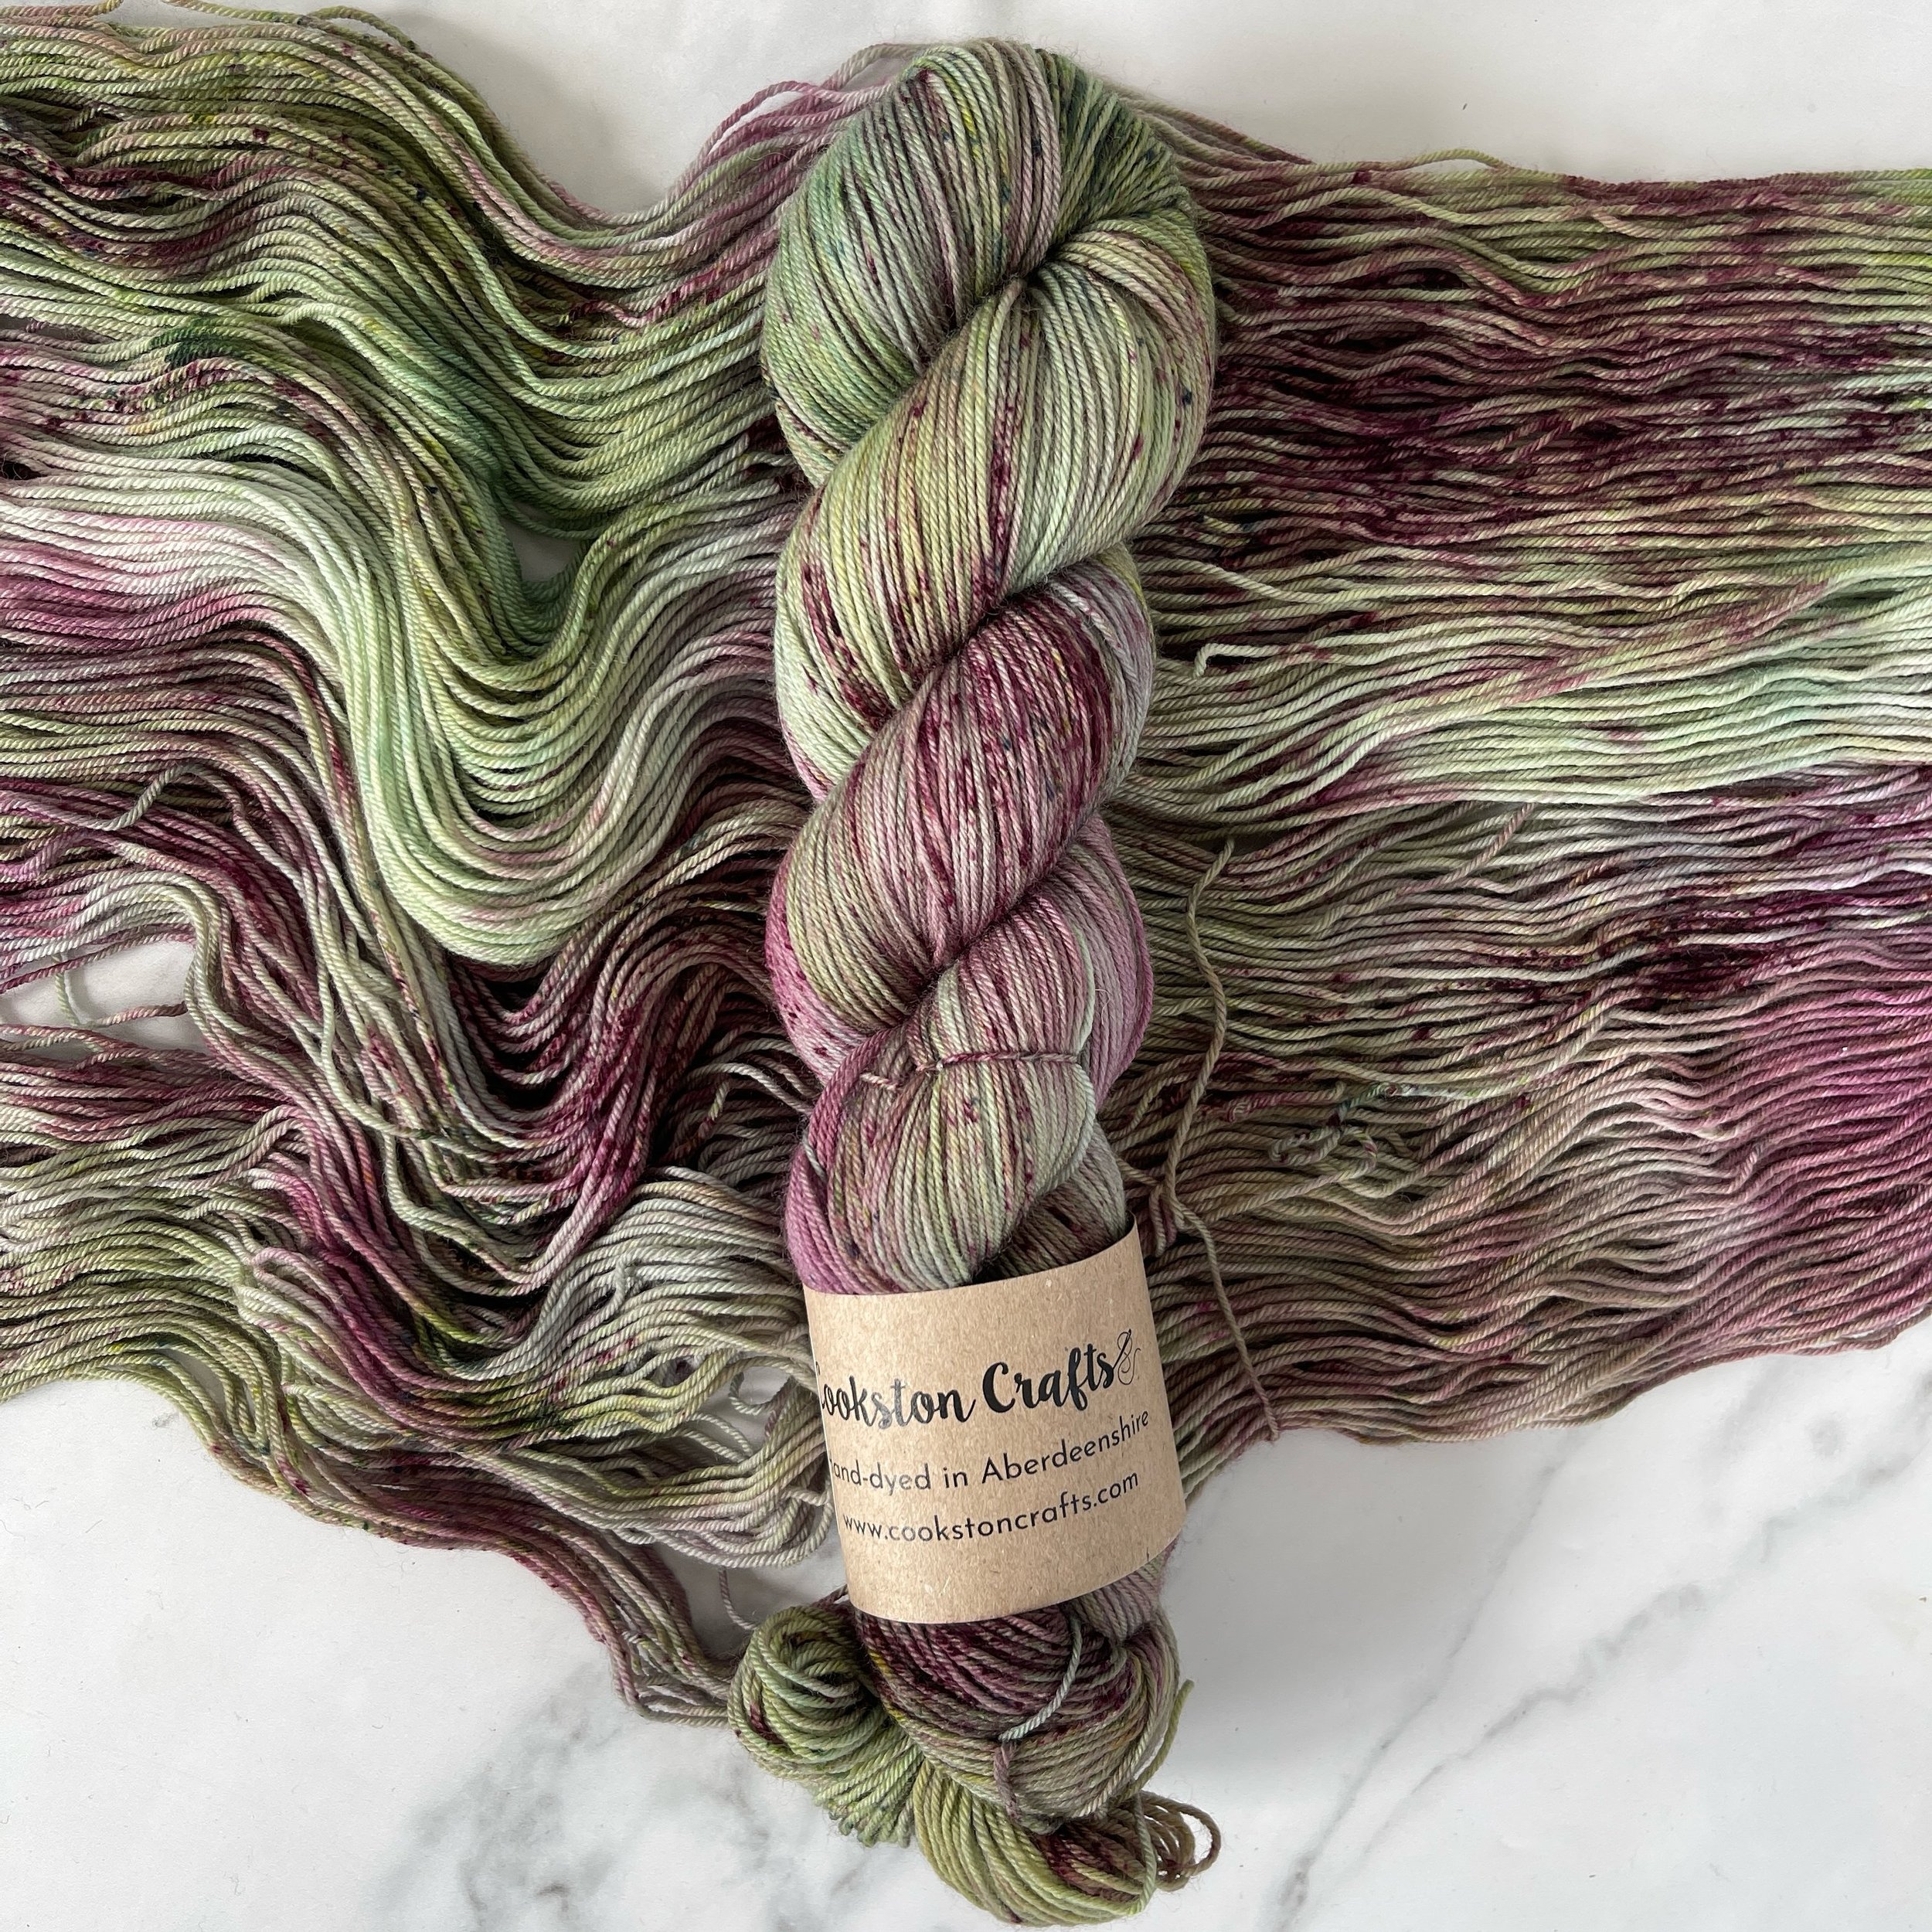 Thistle - Just one of the new colourways in tonight&rsquo;s shop update. A new version of a very old recipe (page 4 of the tatty old recipe book!) 

I&rsquo;ve been restocking the hooks with lots of yarn over the last couple of weeks to build up some